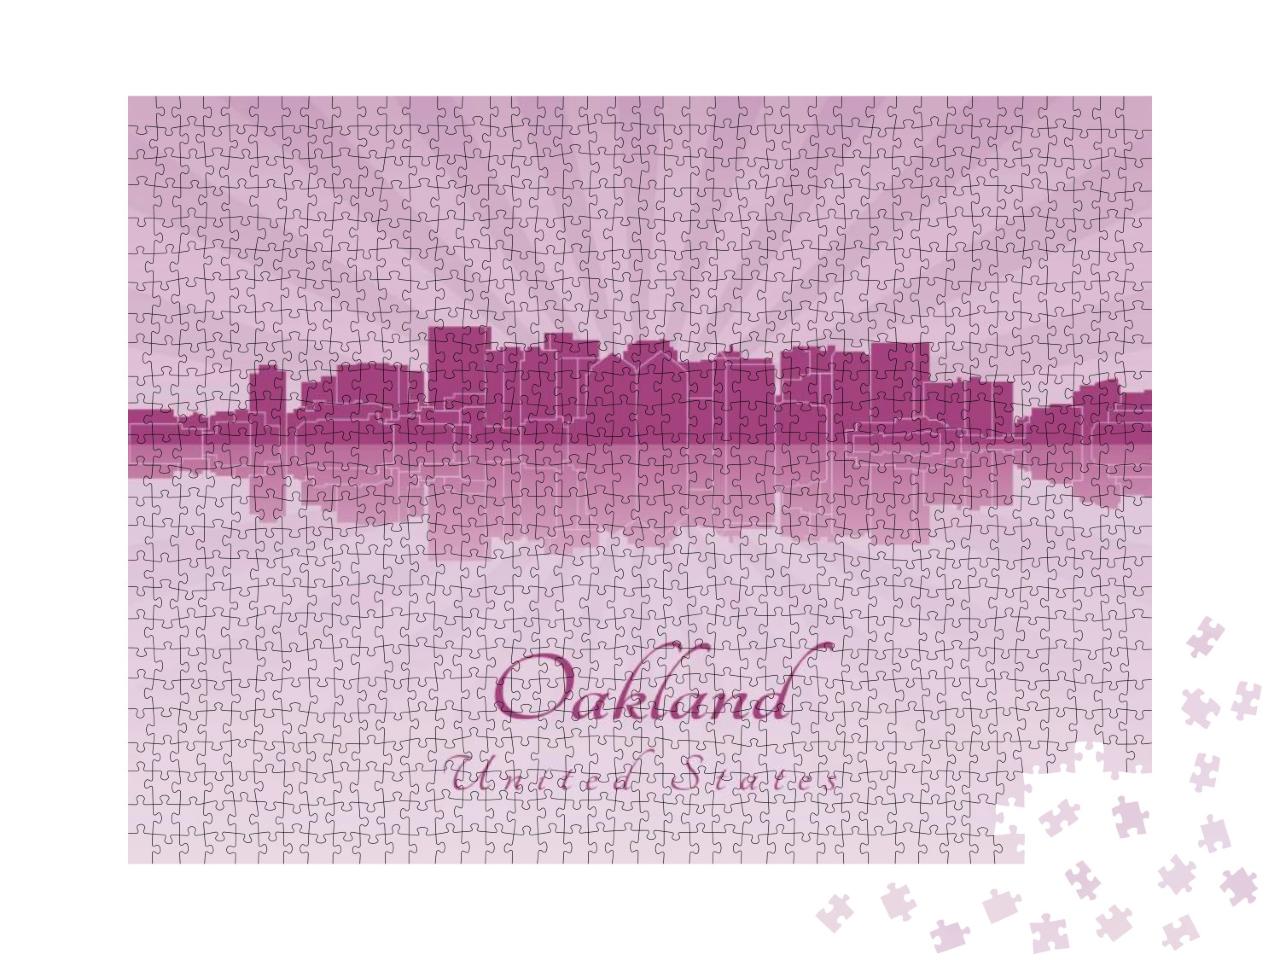 Oakland Skyline in Radiant Orchid in Editable Vector File... Jigsaw Puzzle with 1000 pieces